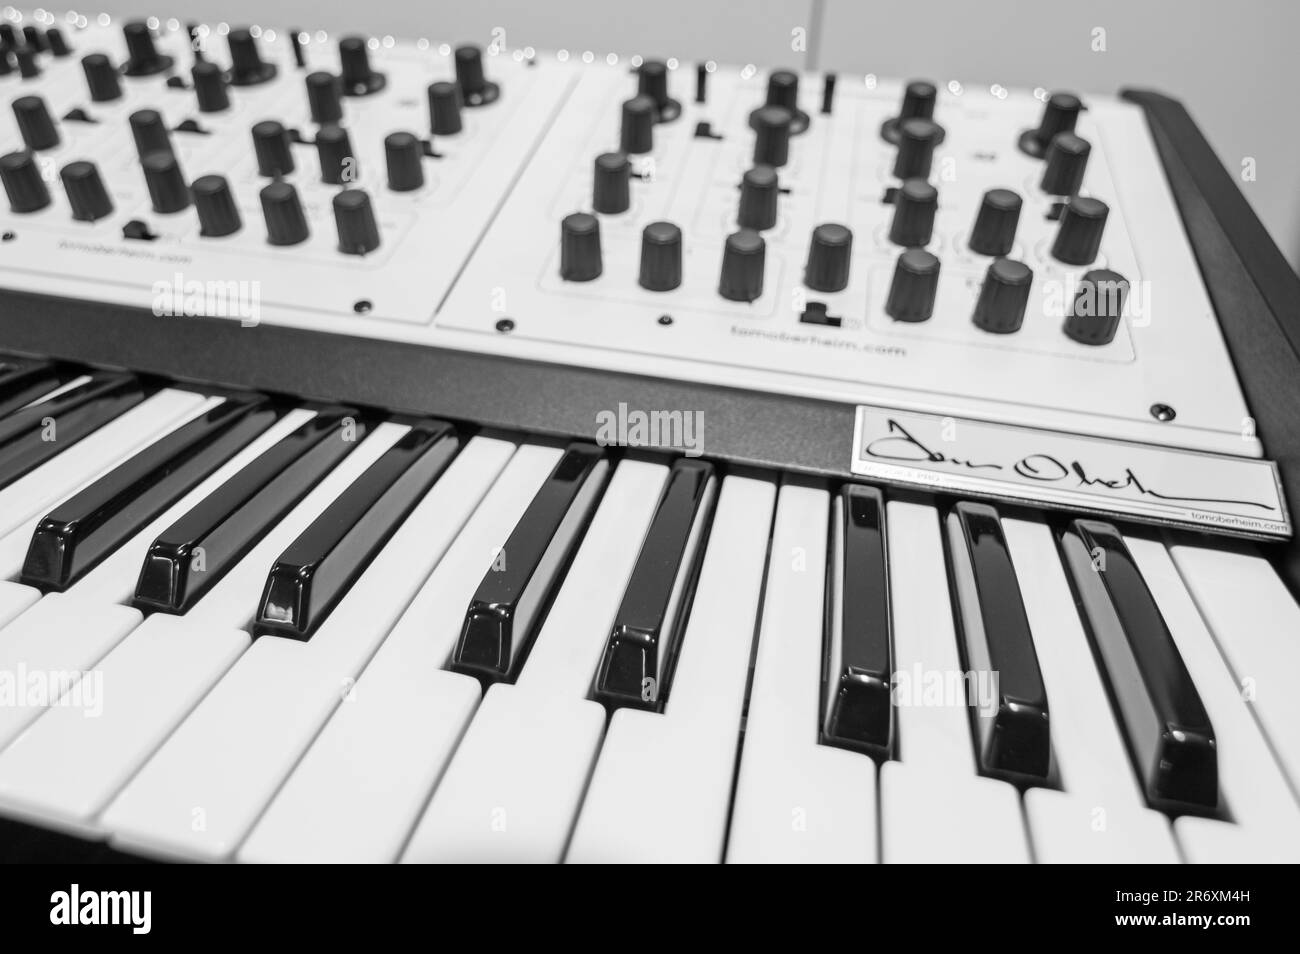 The Tom Oberheim's Two-Voice Pro analog music synthesizer was produced from 2015-2018. Stock Photo